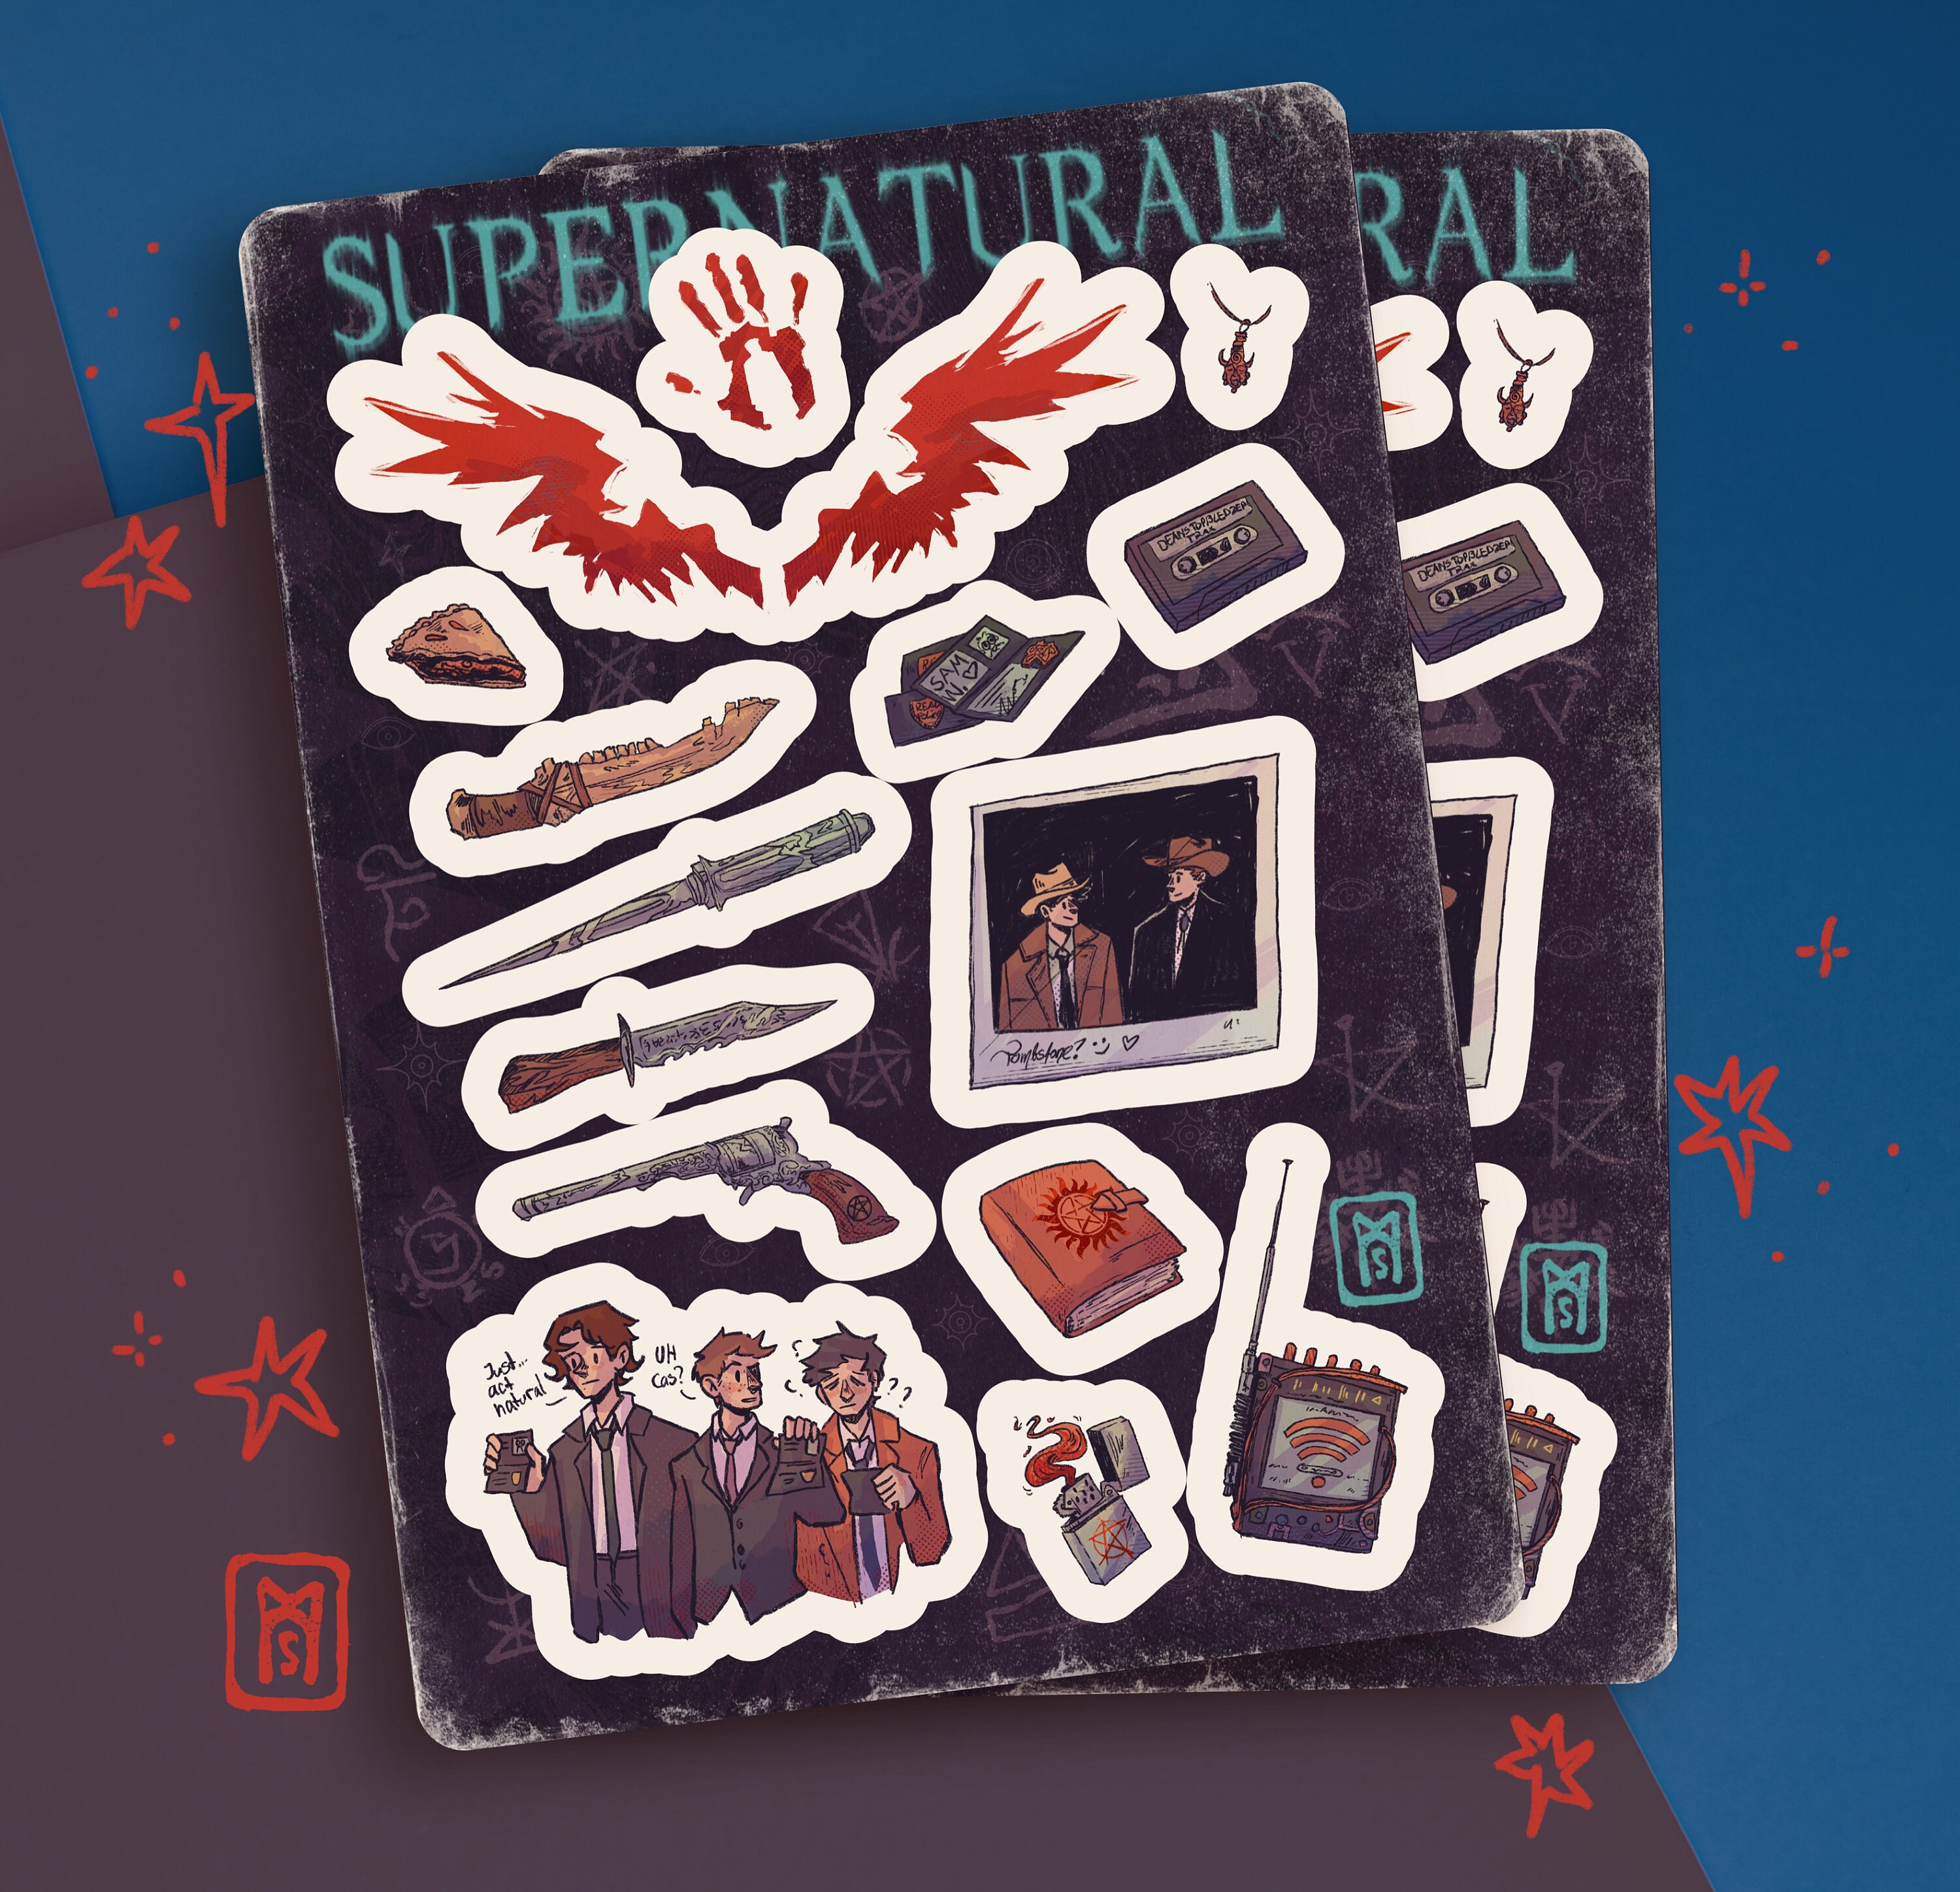 Supernatural Stickers Cute SPN Stickers Group 1 